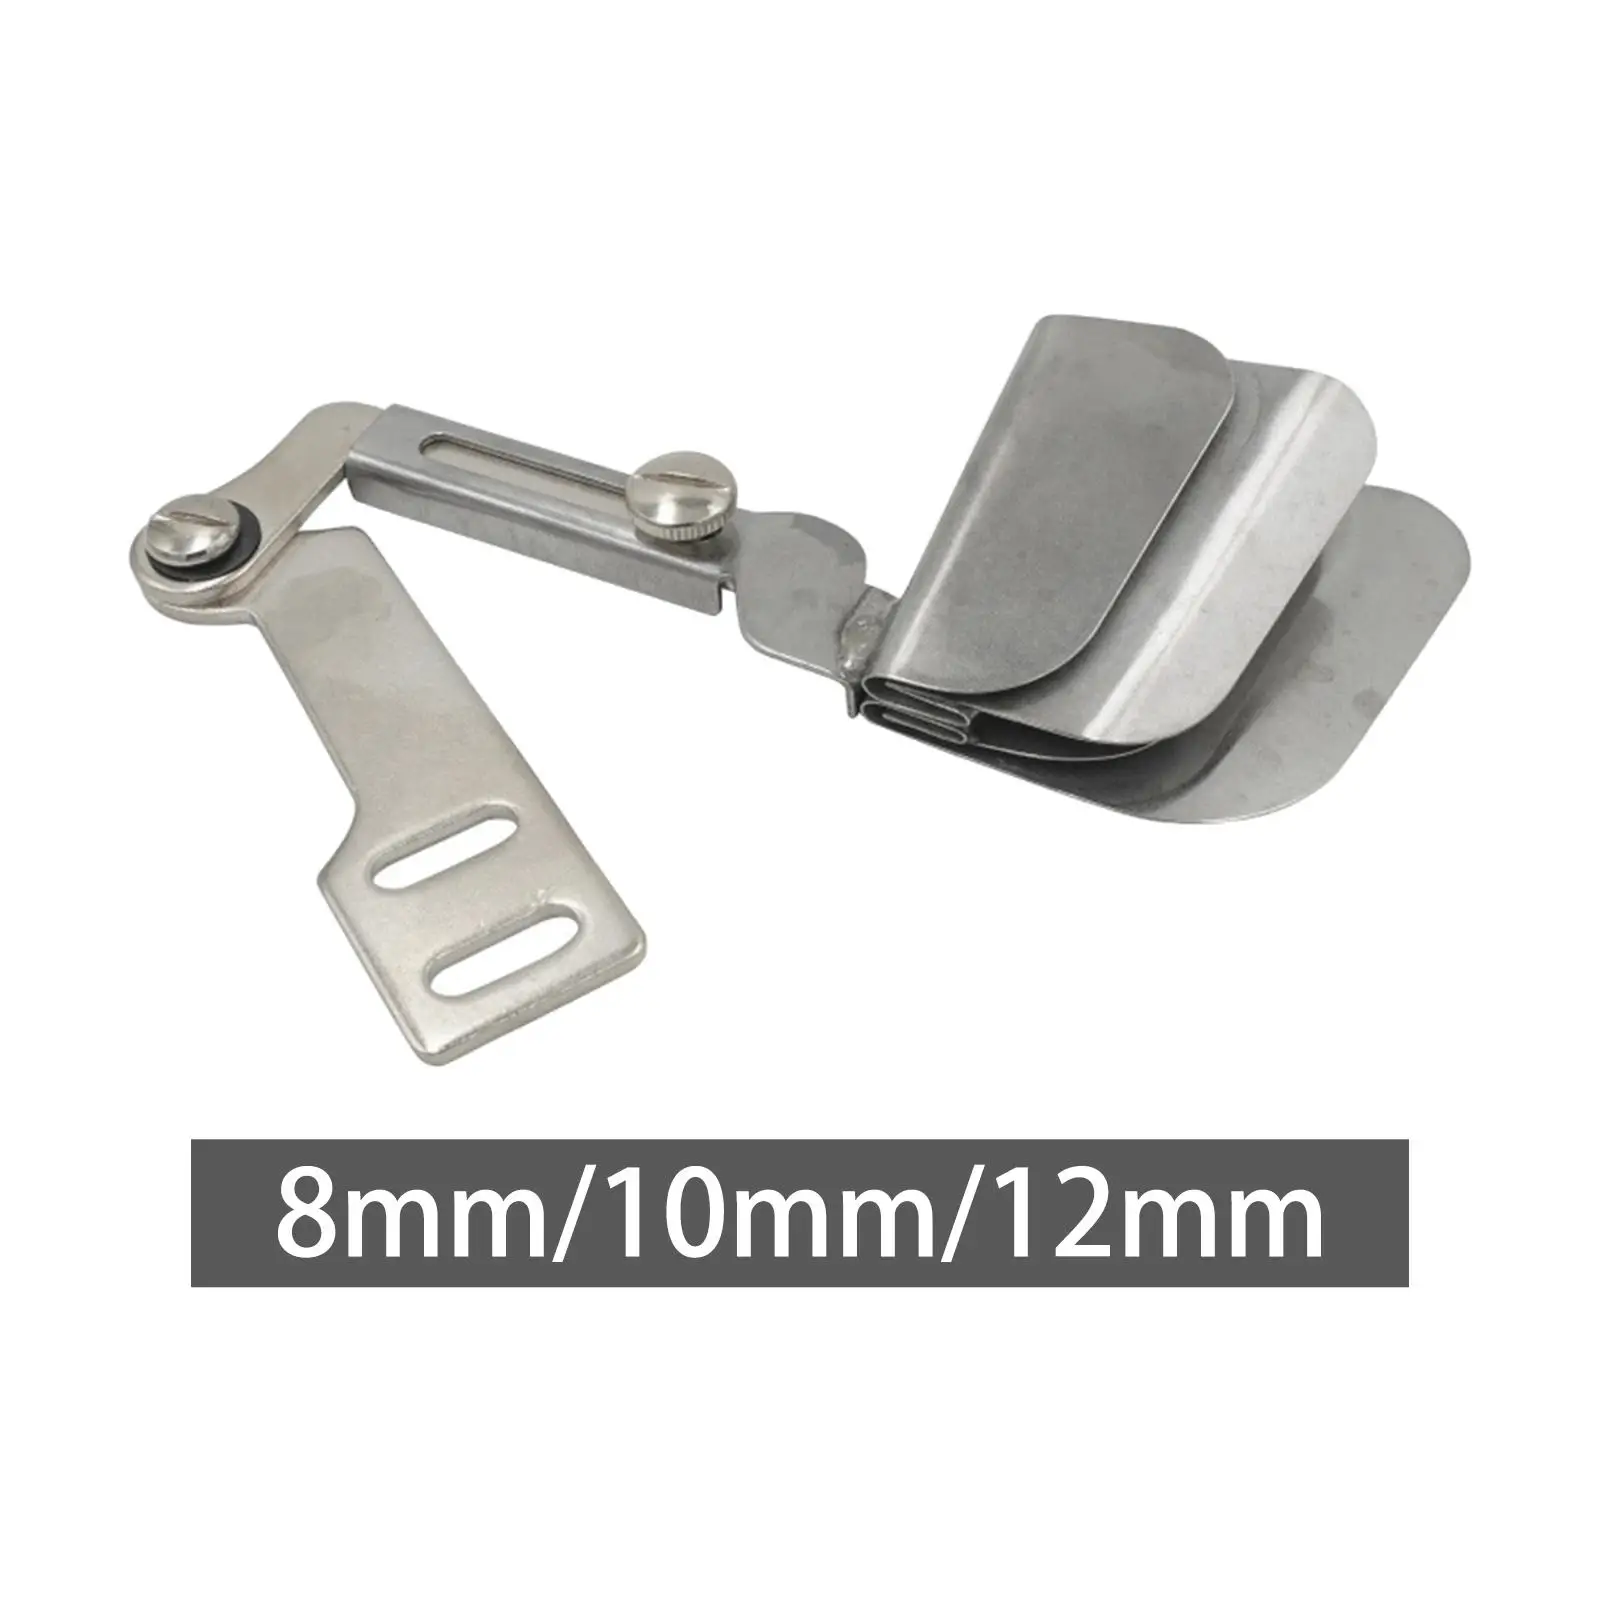 Double Fold Hemmer Foot Part for Home Industrial Sewing Machine Presser Foot for Curtain Bed Sheet Shirts Trousers Quilt Cover